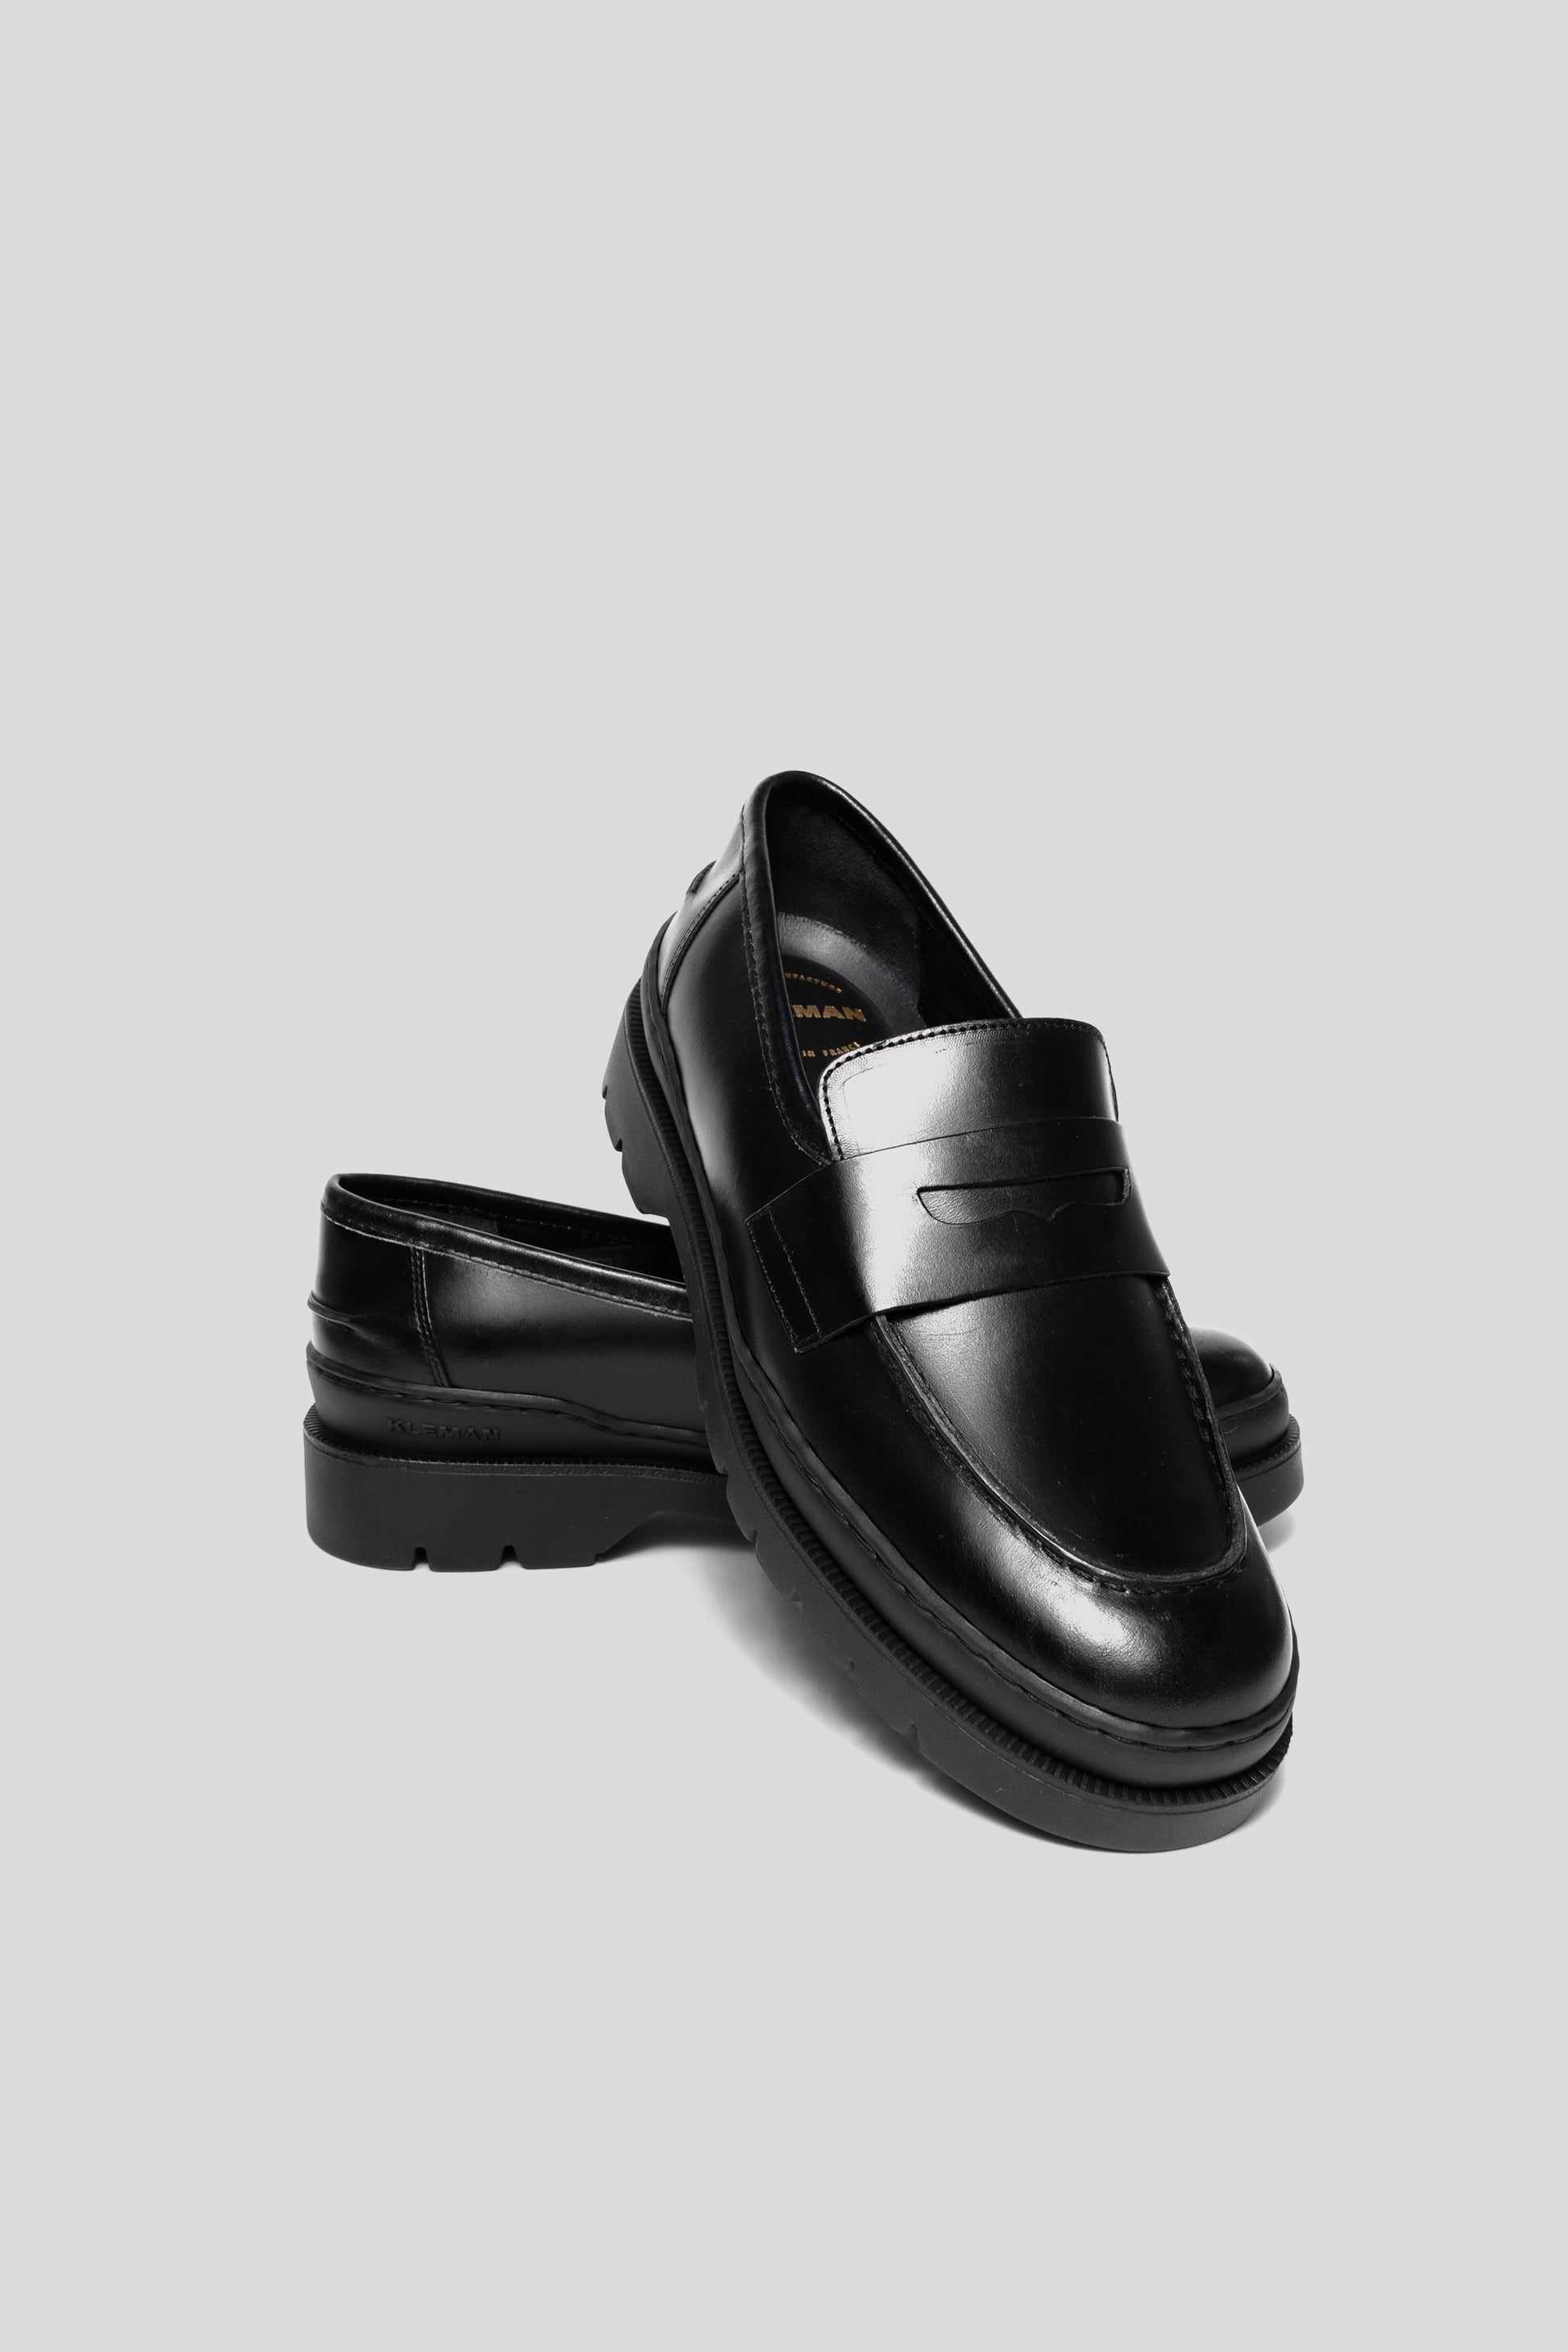 Kleman A ccore M VGT Loafer in Black